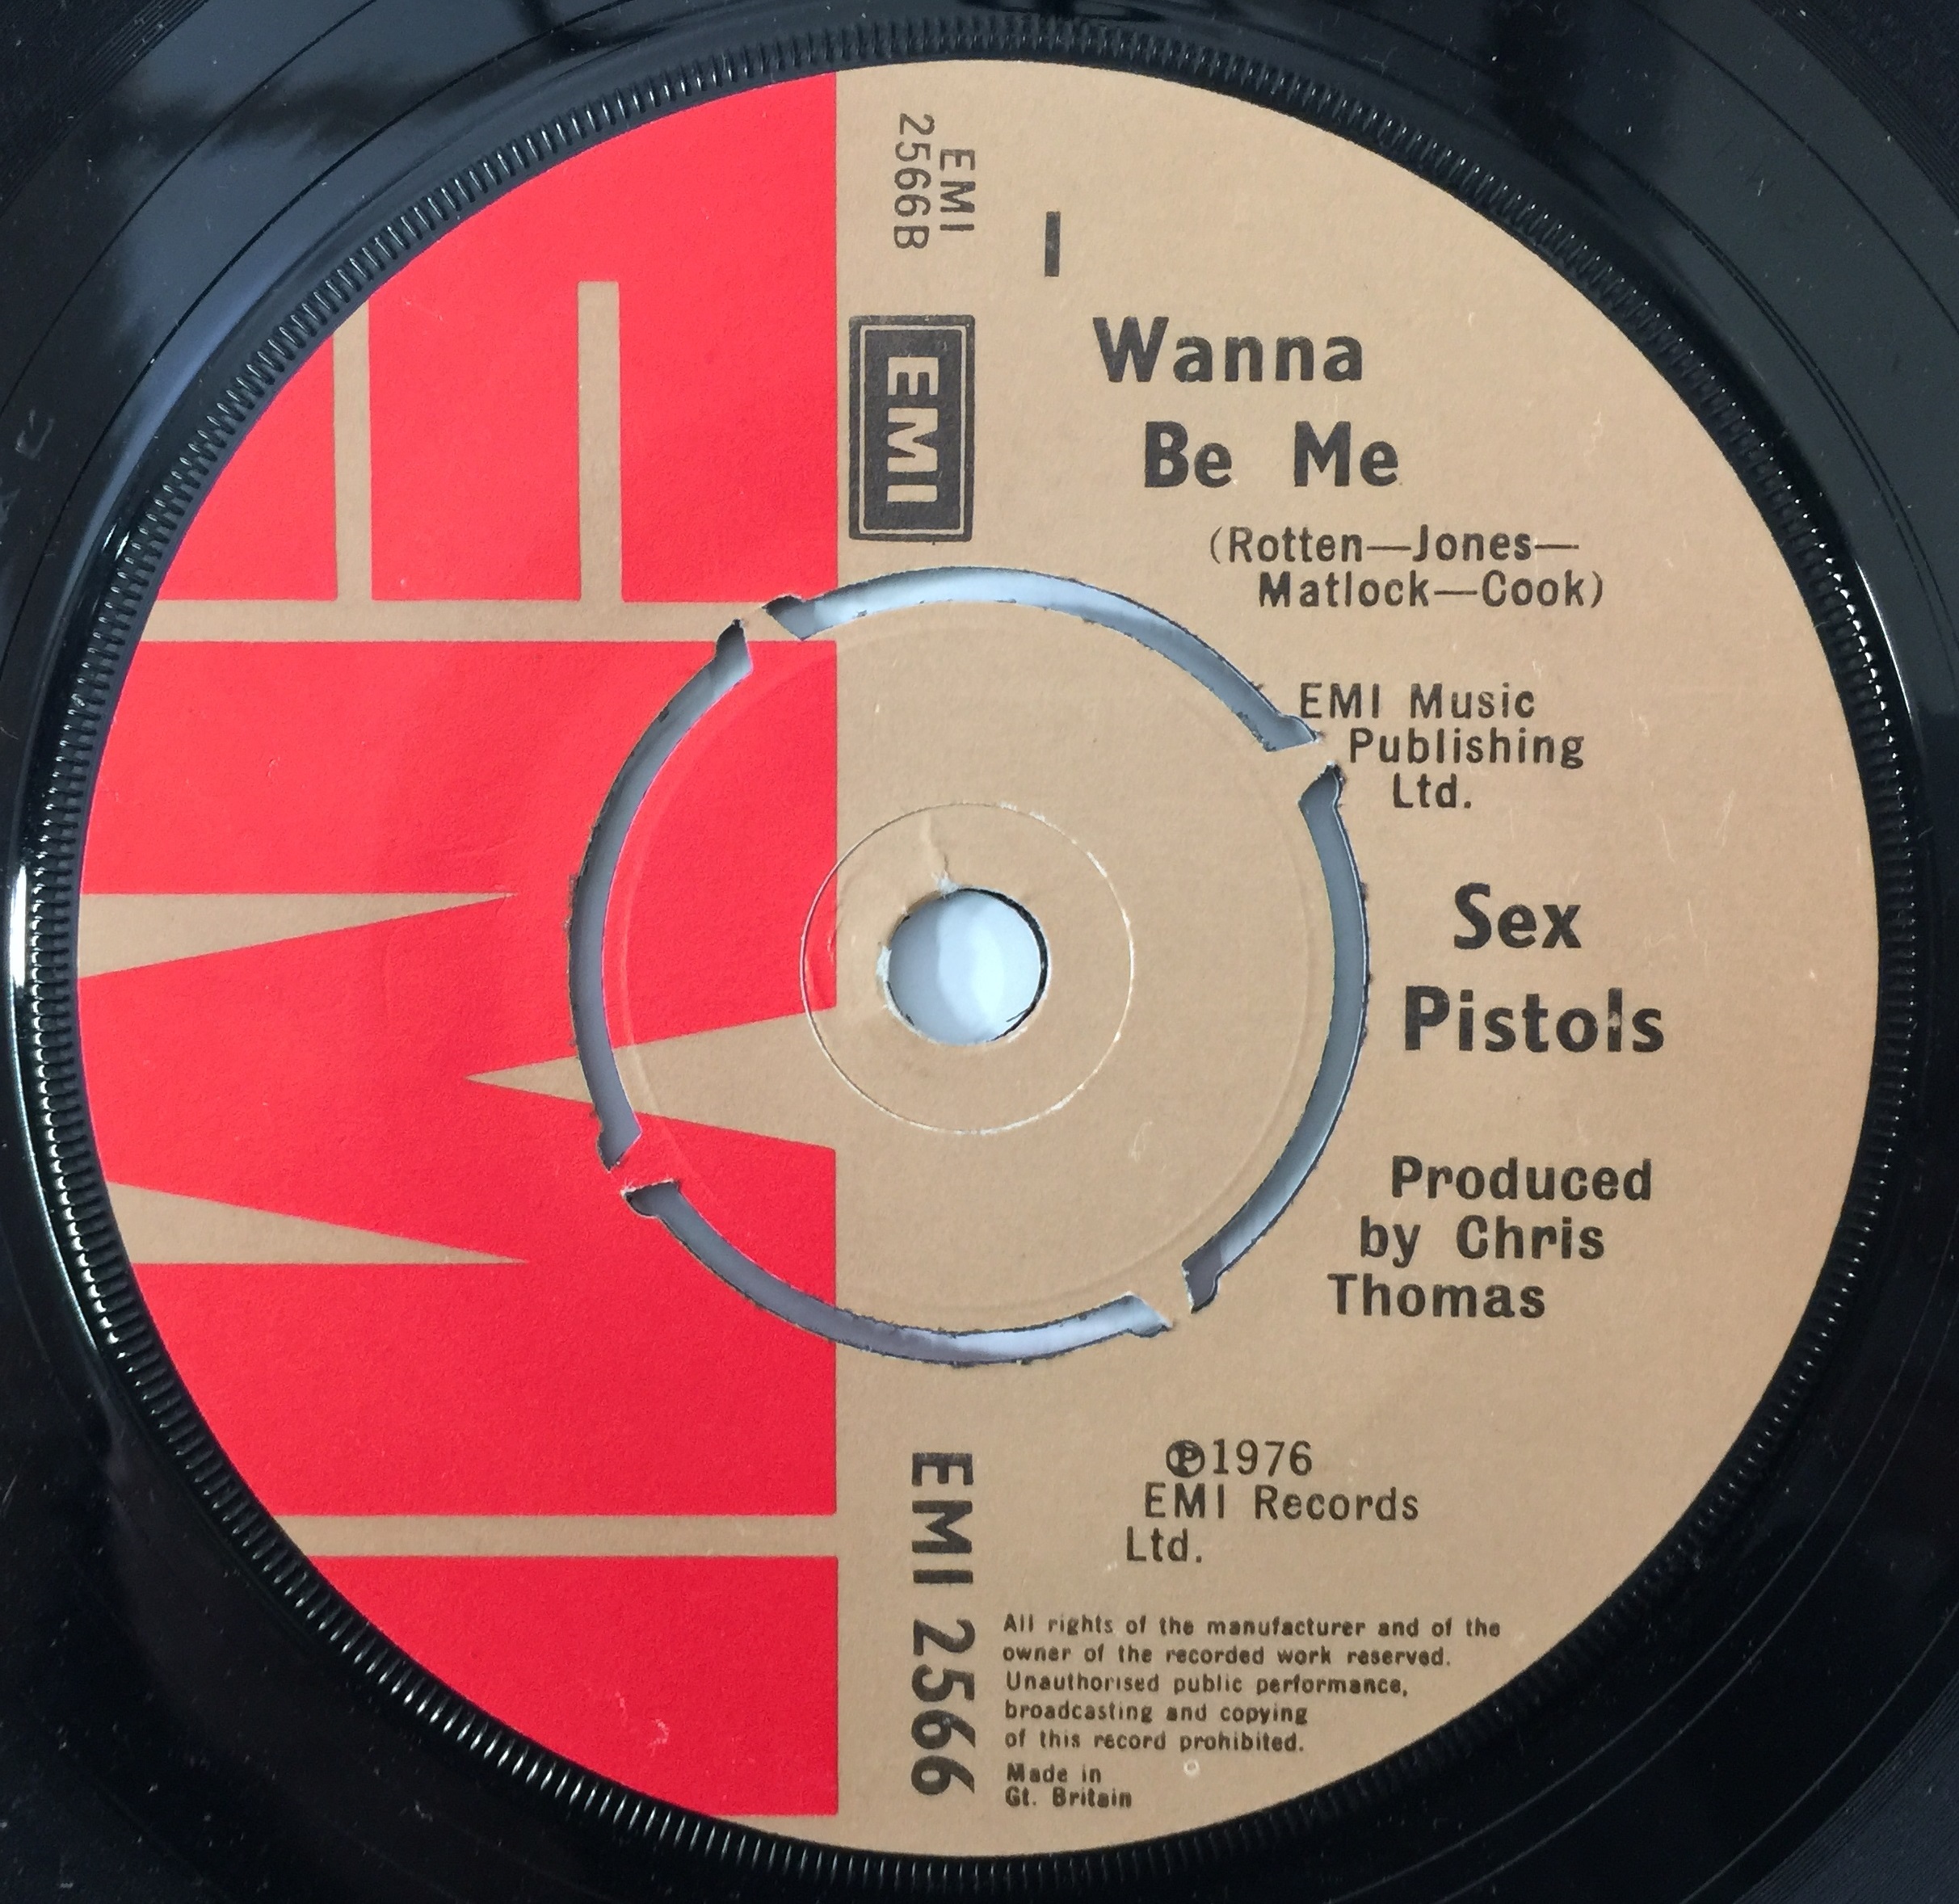 Lot 792 - SEX PISTOLS - ANARCHY IN THE UK 7